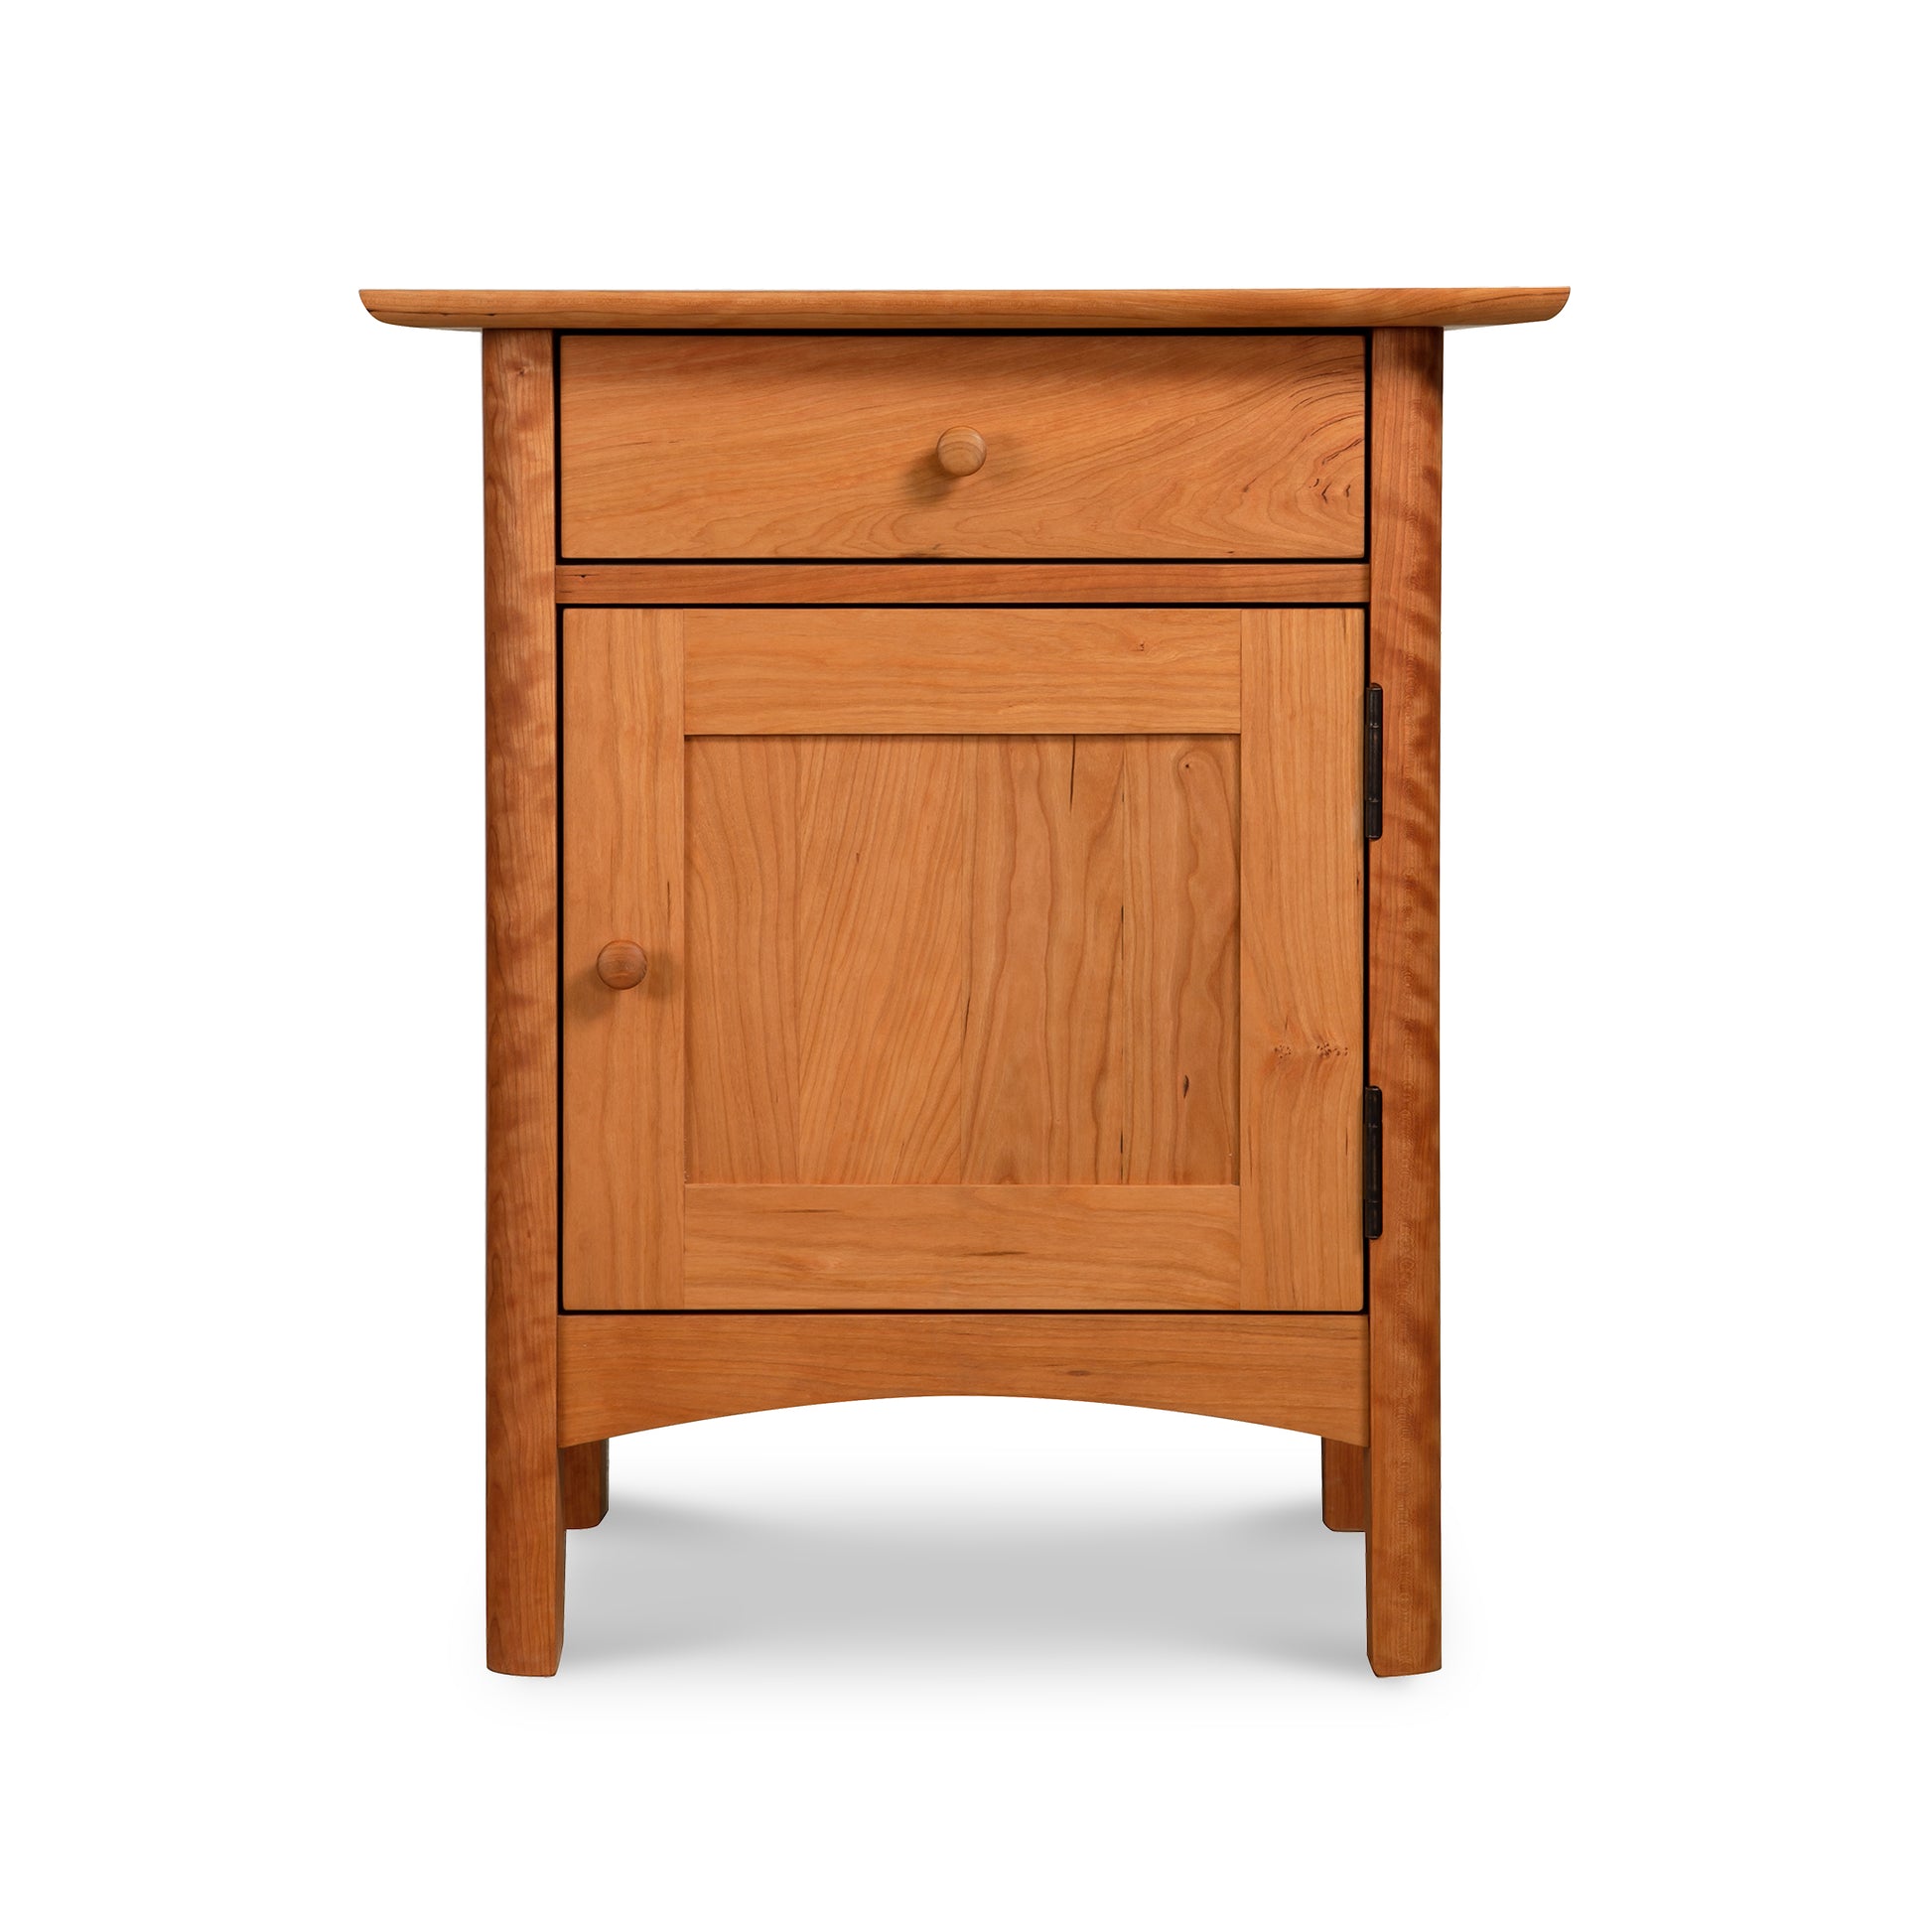 Vermont Furniture Designs Heartwood Shaker 1-Drawer Nightstand with Door: Solid wood bedside table with a single drawer and a cabinet door, finished with eco-friendly oil, isolated on a white background.